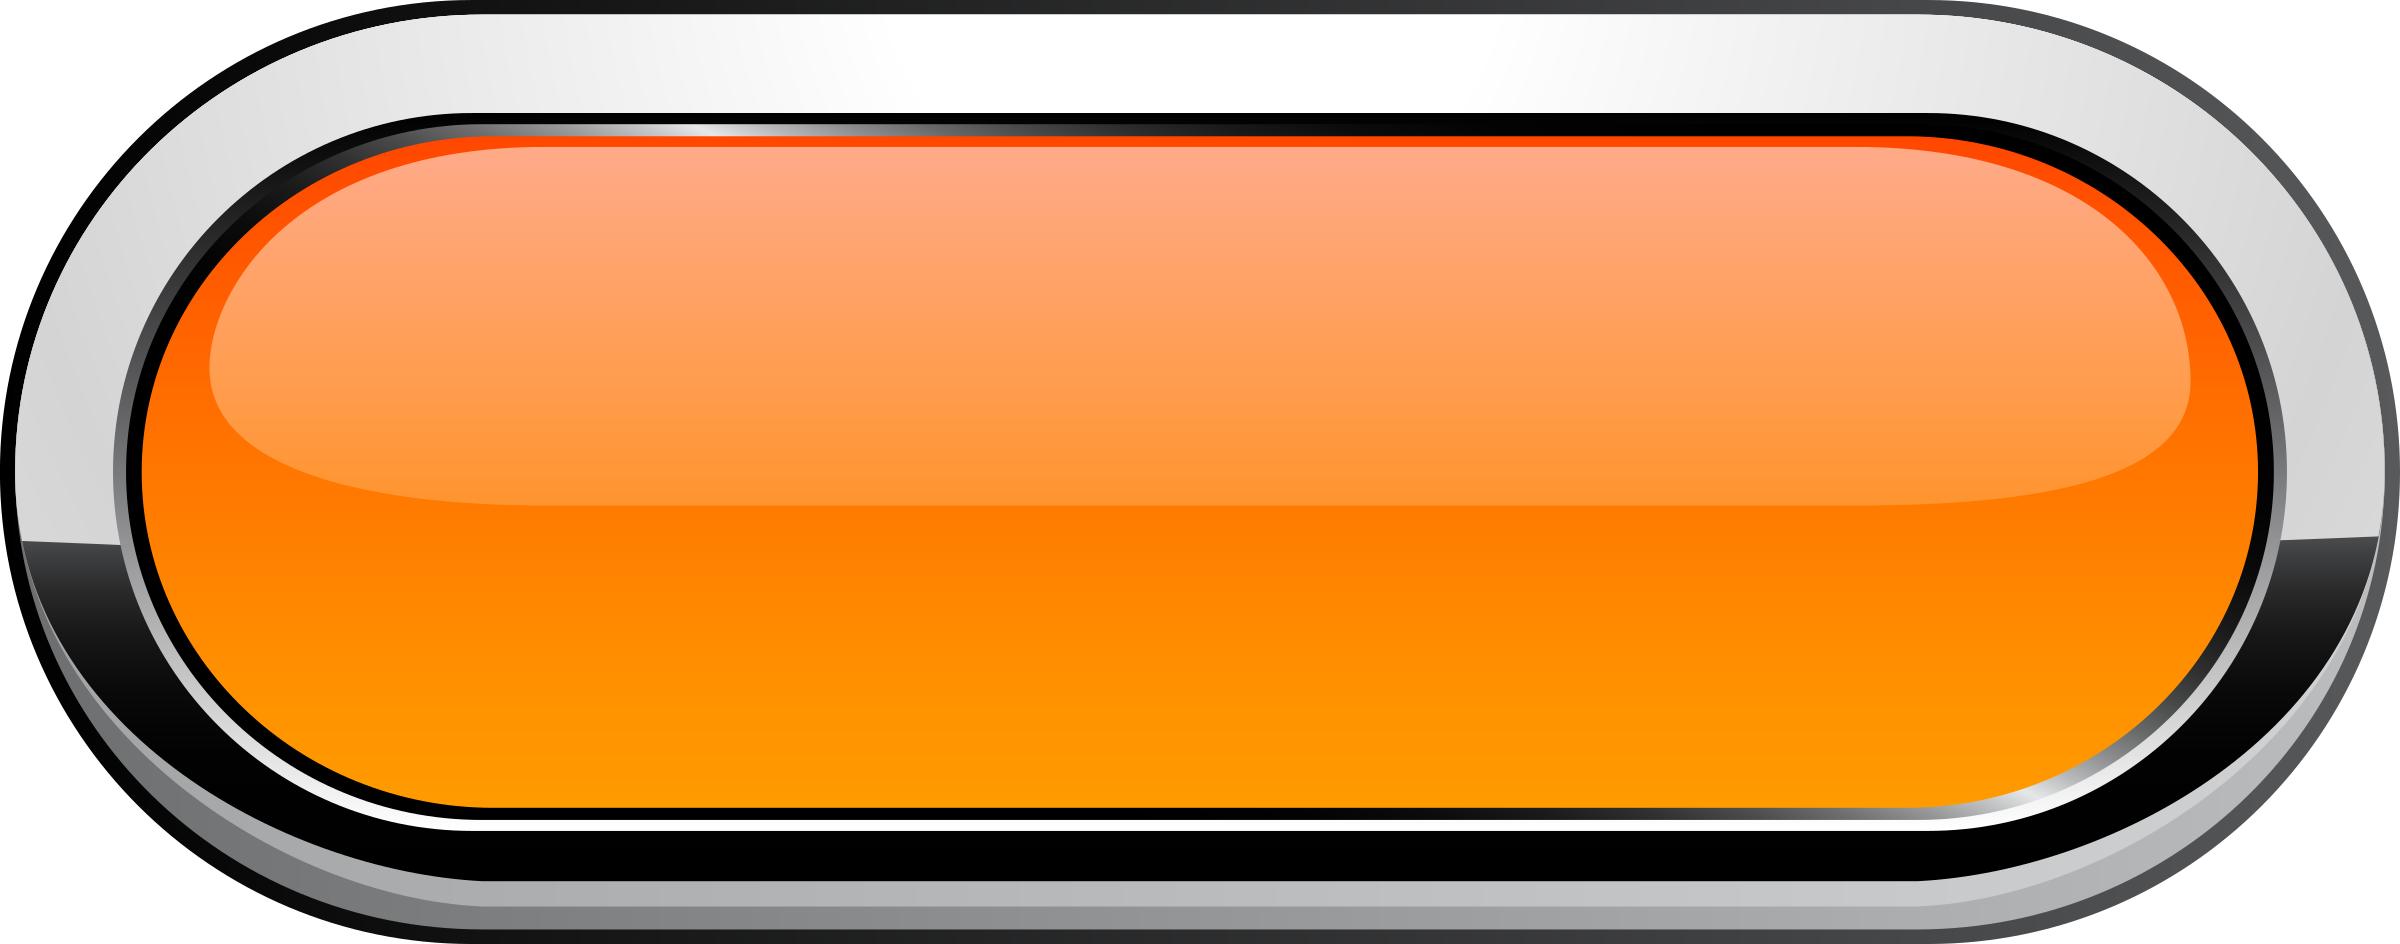 Orange Rounded Button png